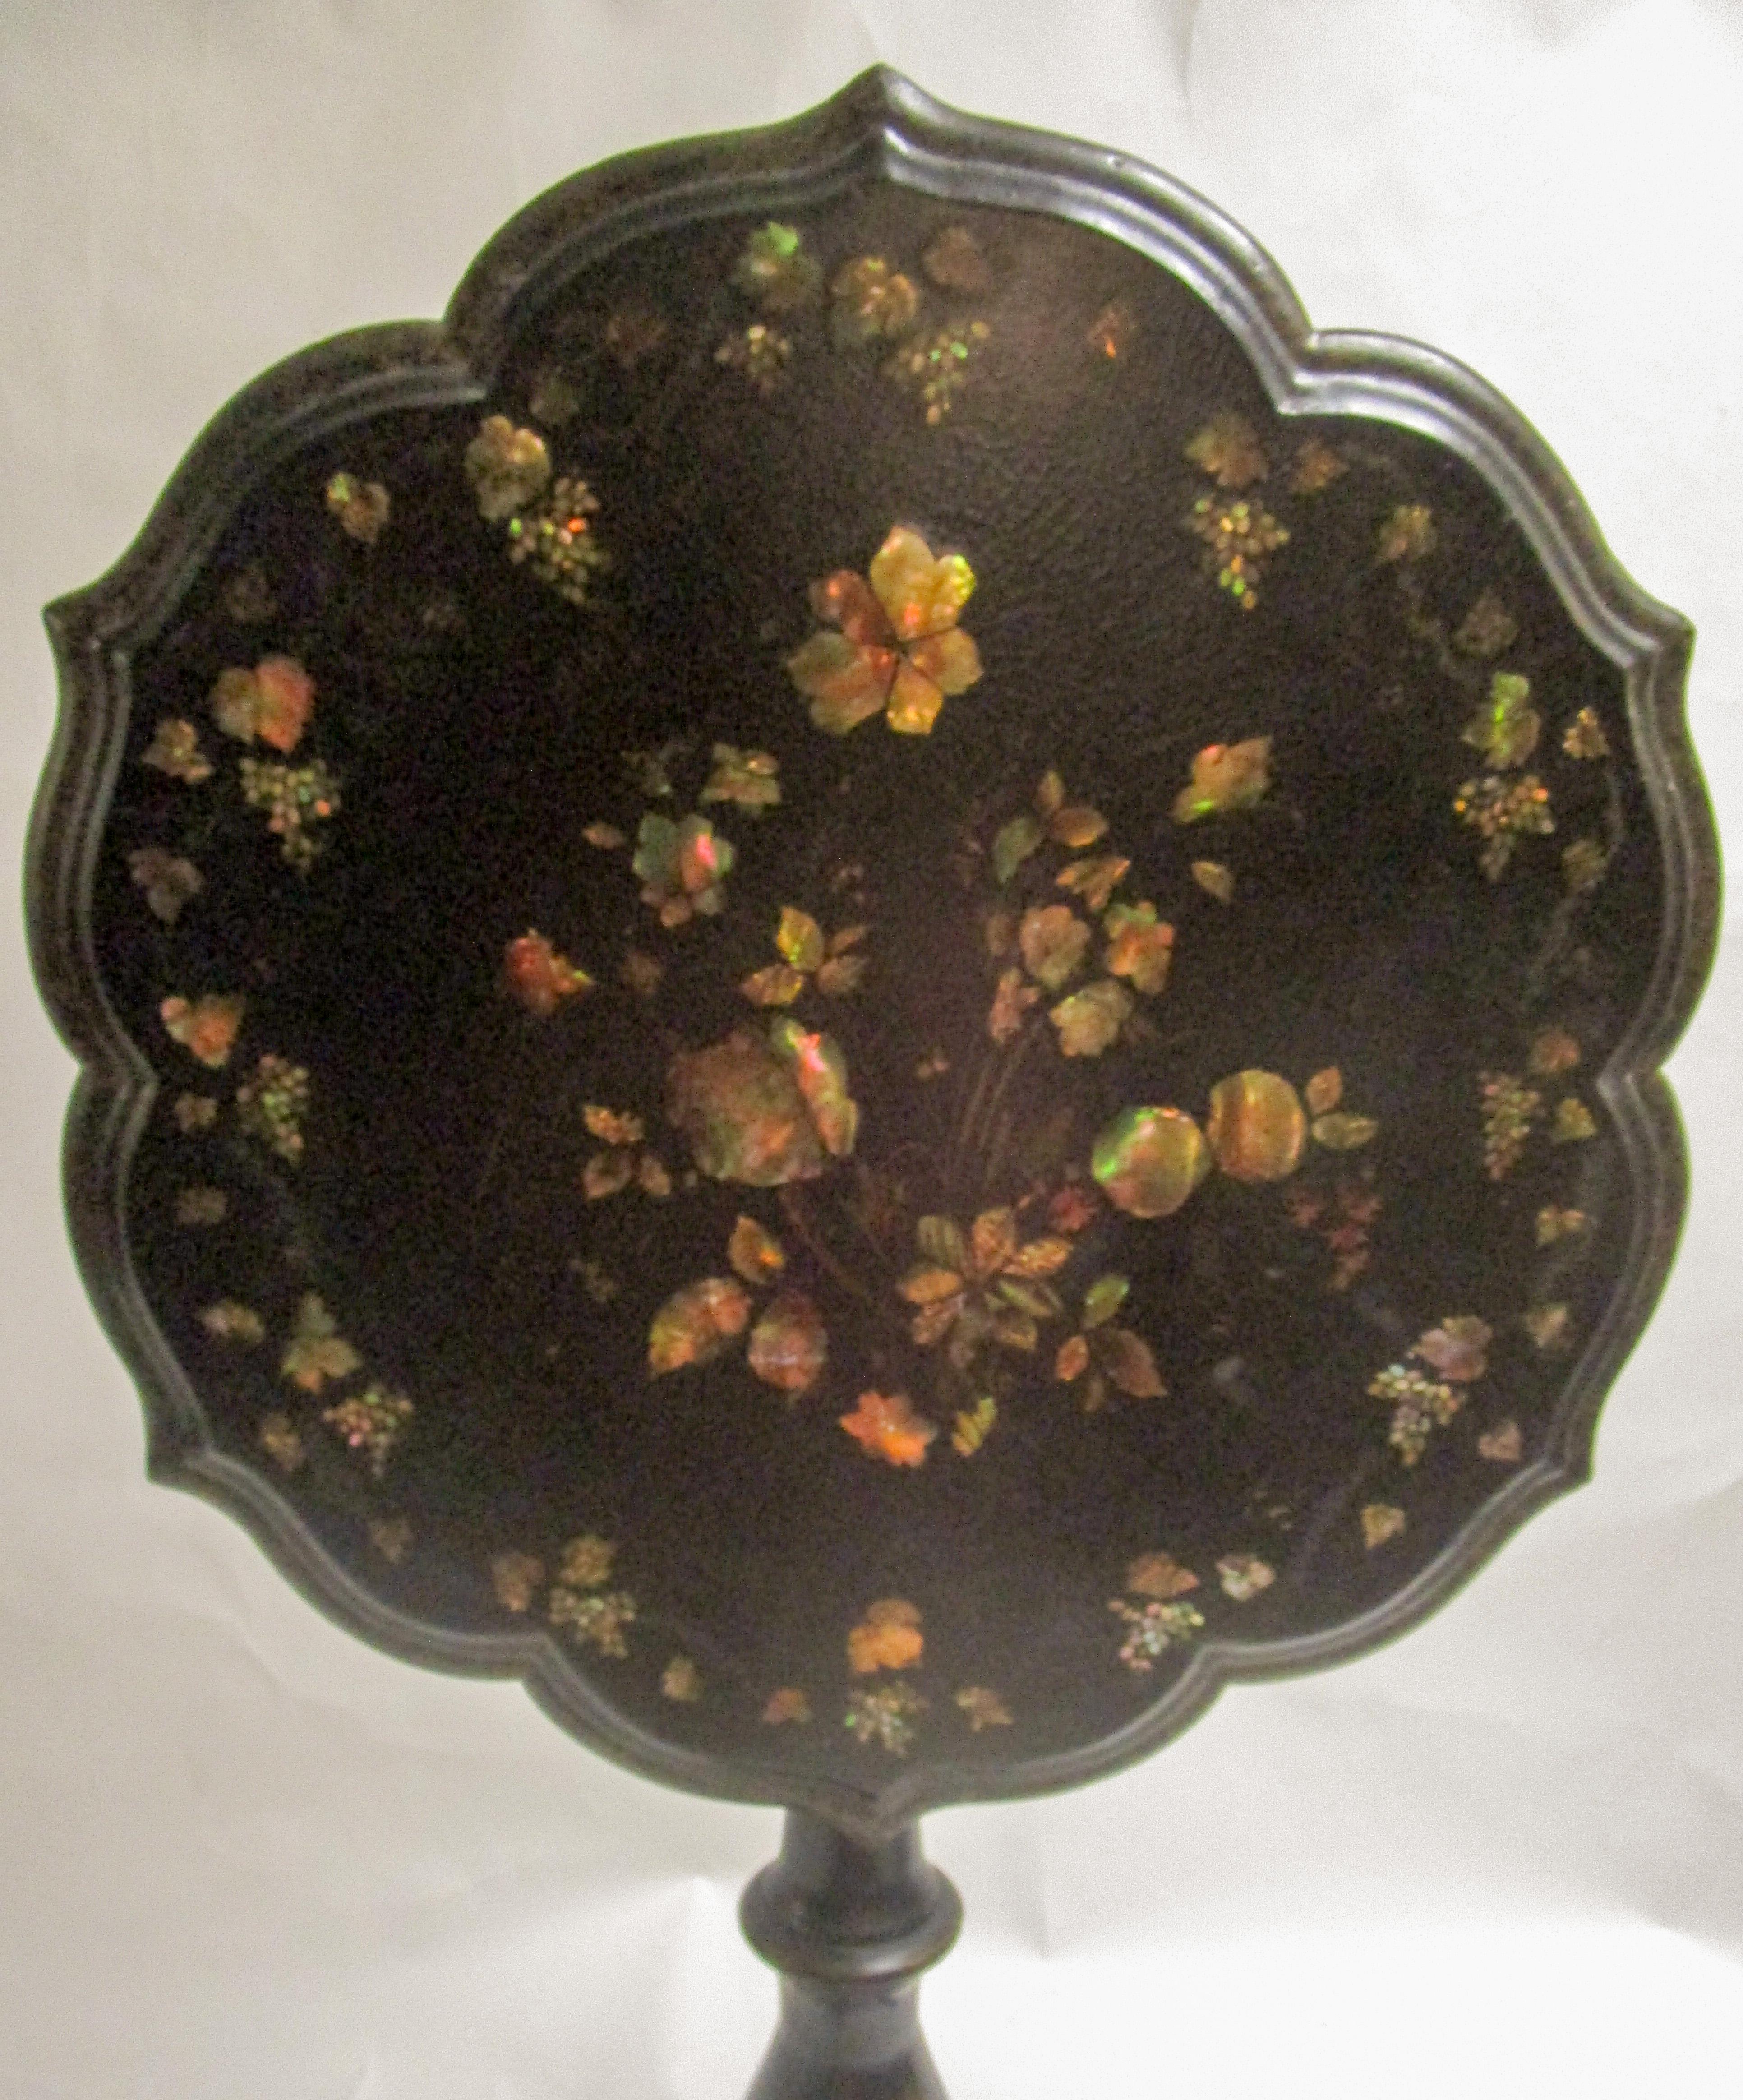 Large size English papier mâché japanned tilt-top gueridon with an intricate inlaid mother-of-pearl top done in a floral motif. The top is unusual because it features an intricate triple scalloped edge that comes to six points. The table is